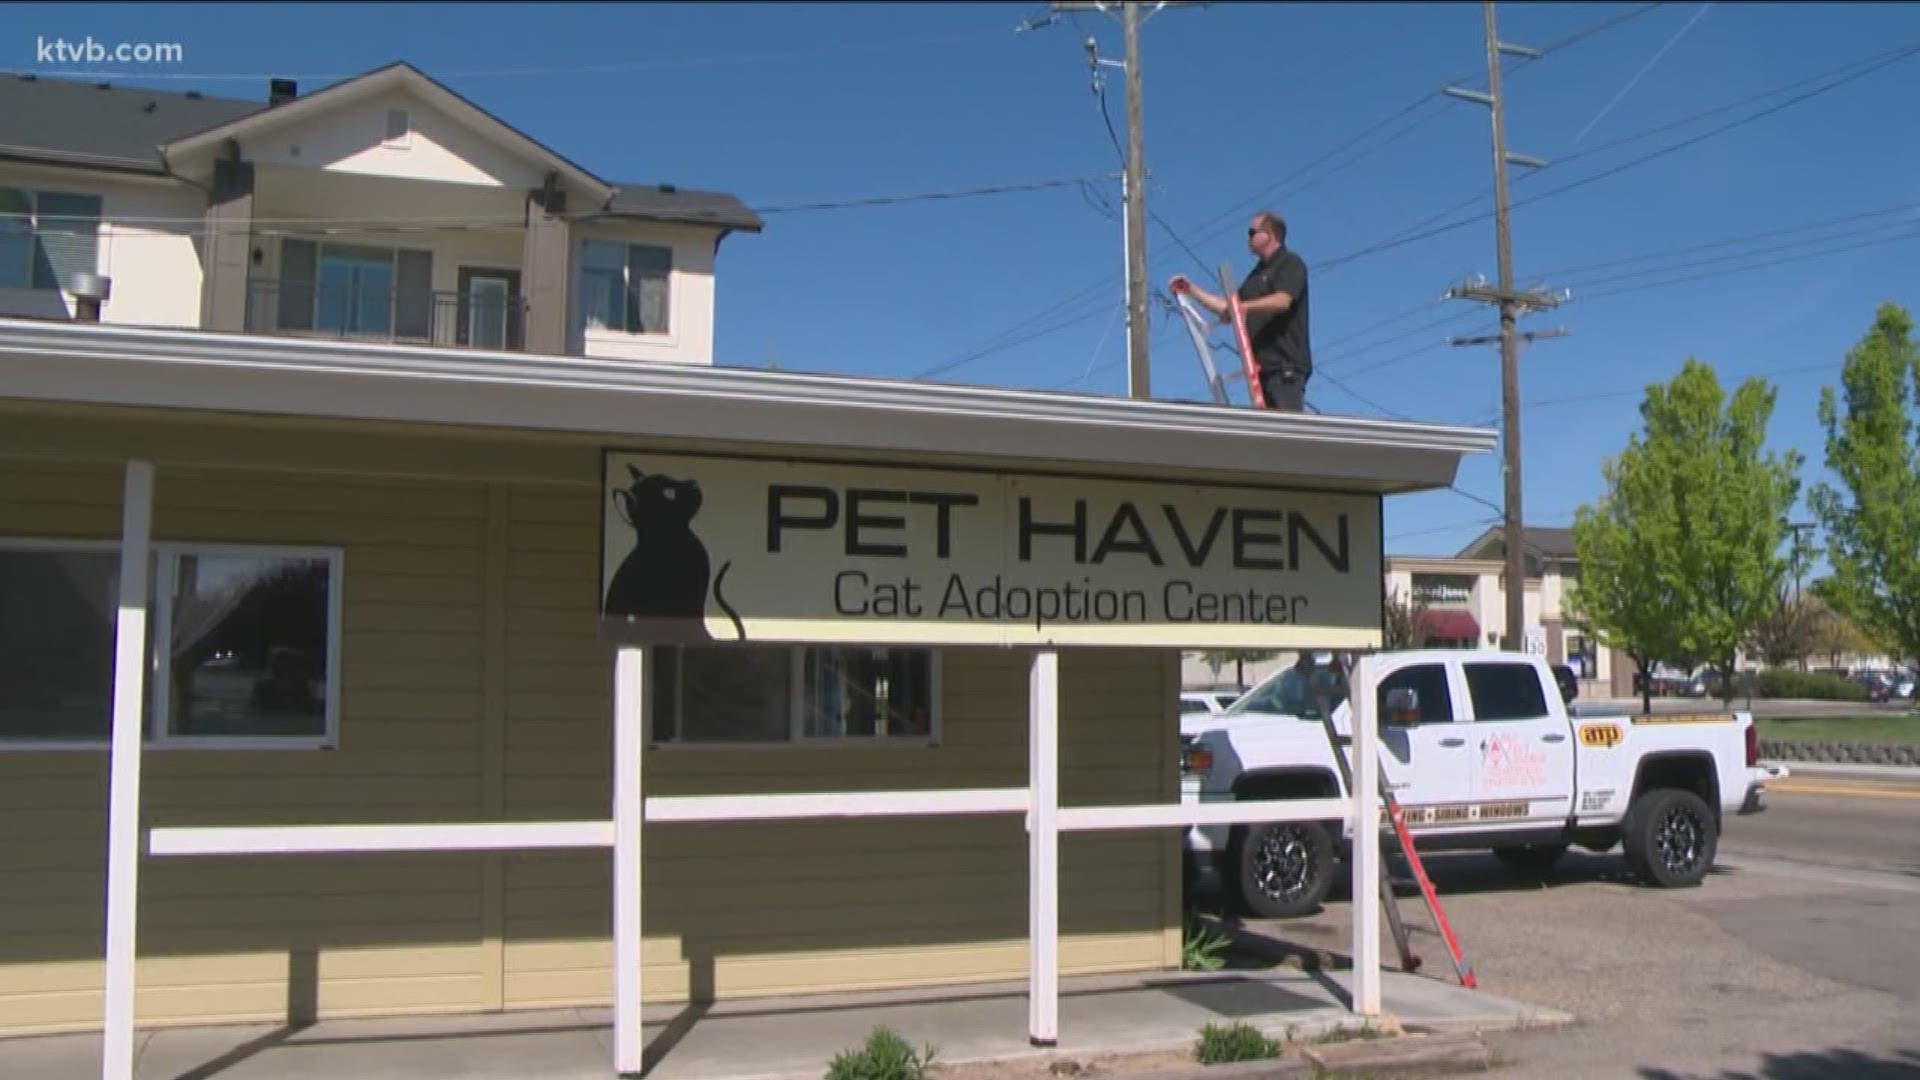 Canyon County Pet Haven will be getting a new roof thanks to Dennis Dillon.